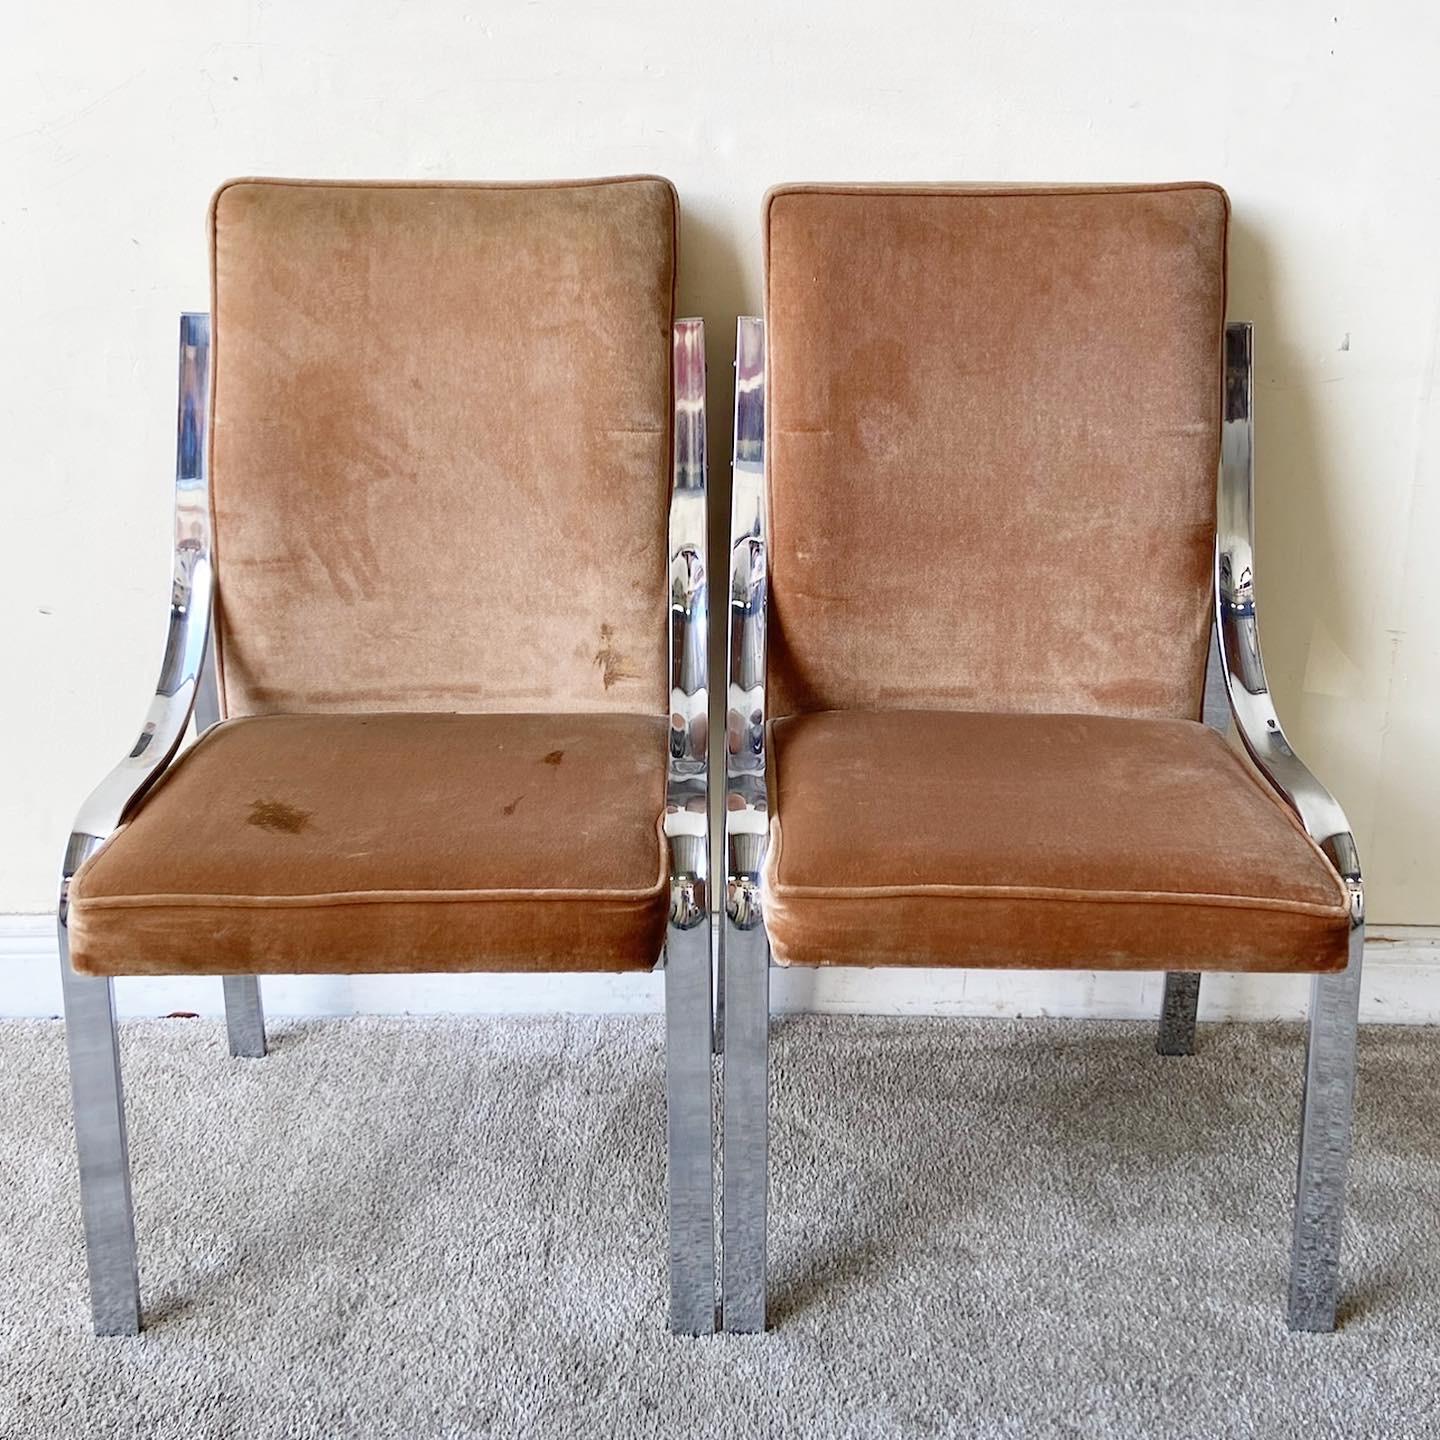 American Mid Century Modern Brown Velvet & Chrome Dining Chairs - 6 Pieces